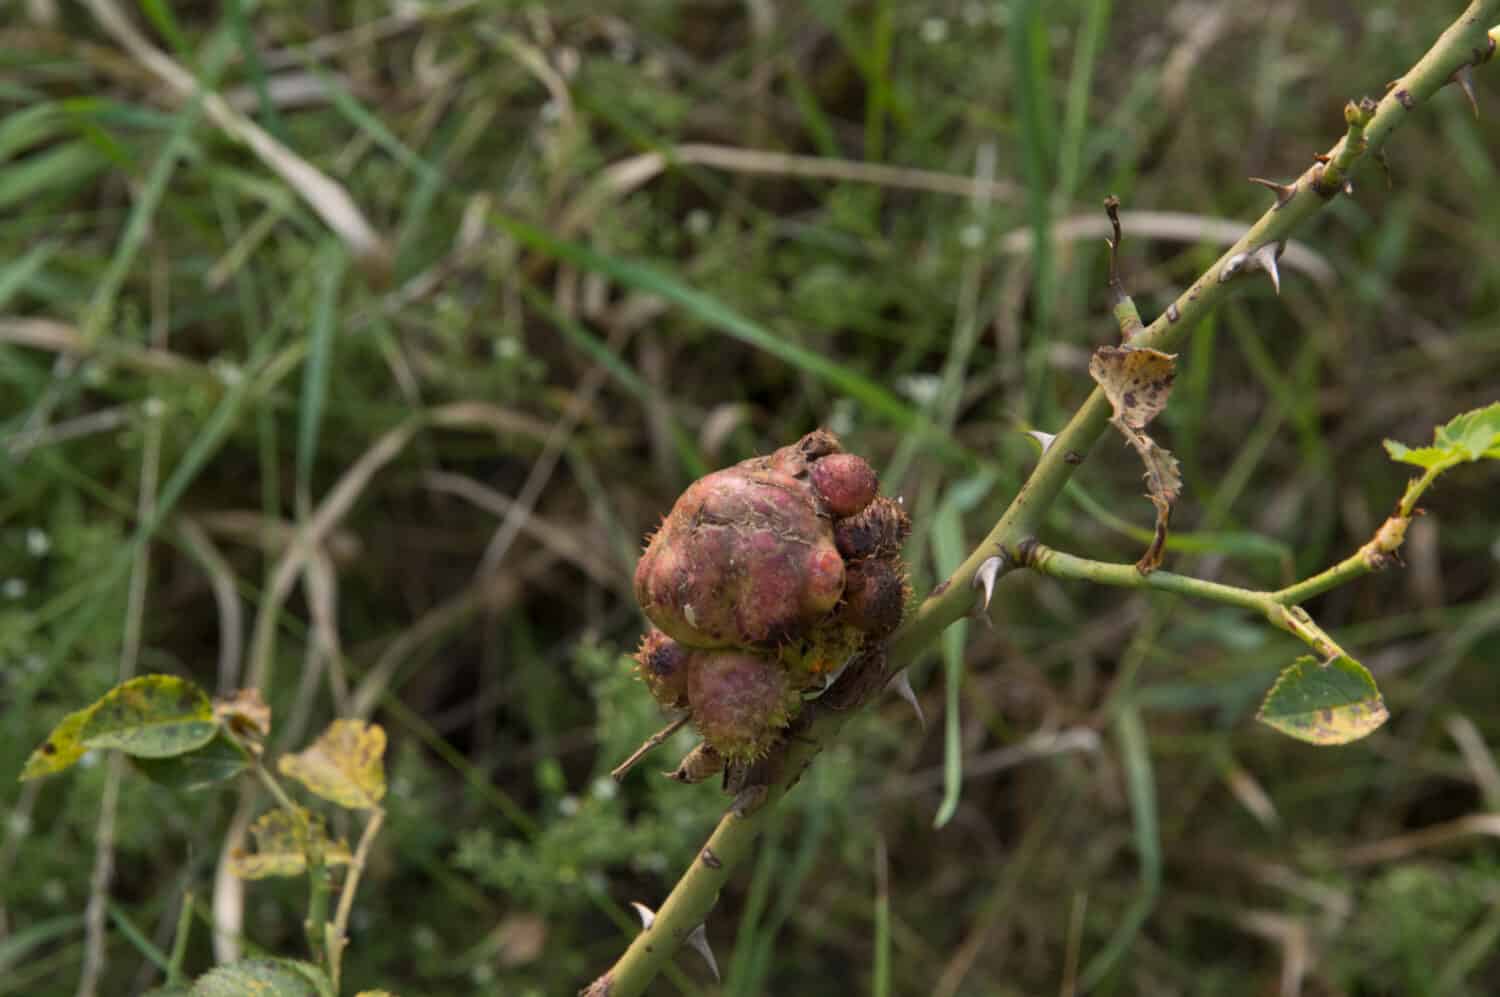 close-up: irregular tumor on stems of wild rose known as crow gall or rose cancer